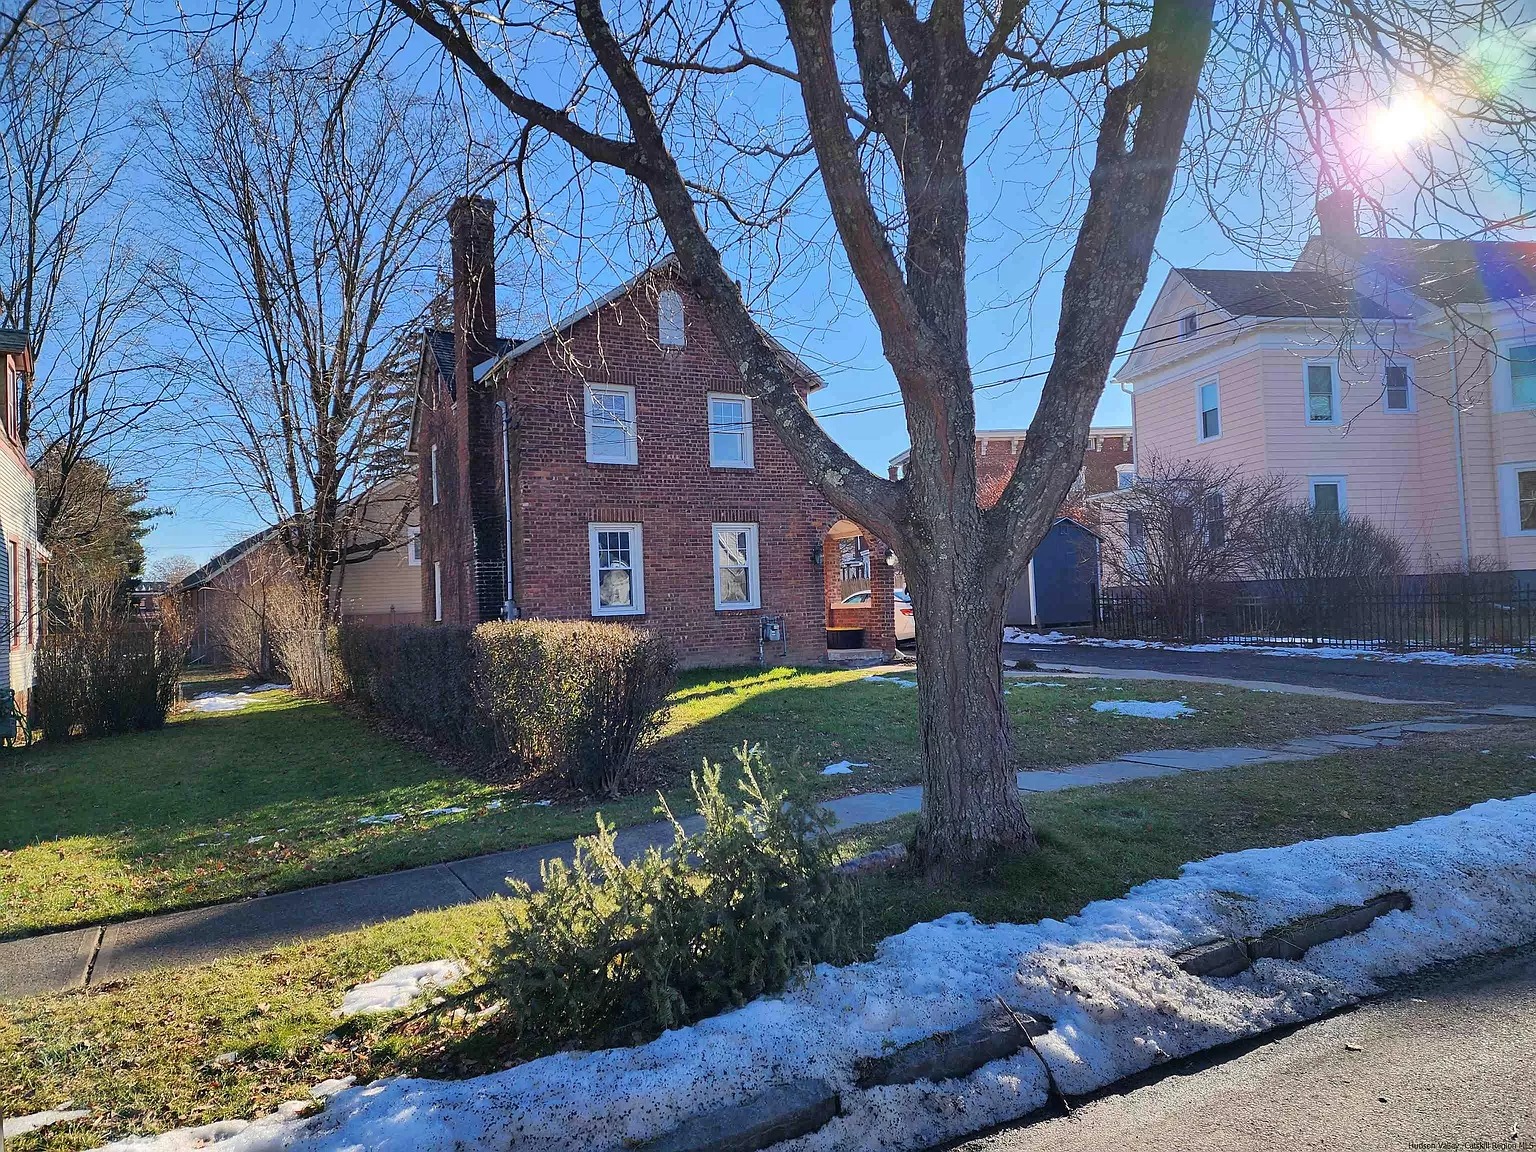 Residential front yard of brick two-story in Saugerties with sidewalk and snowdrift